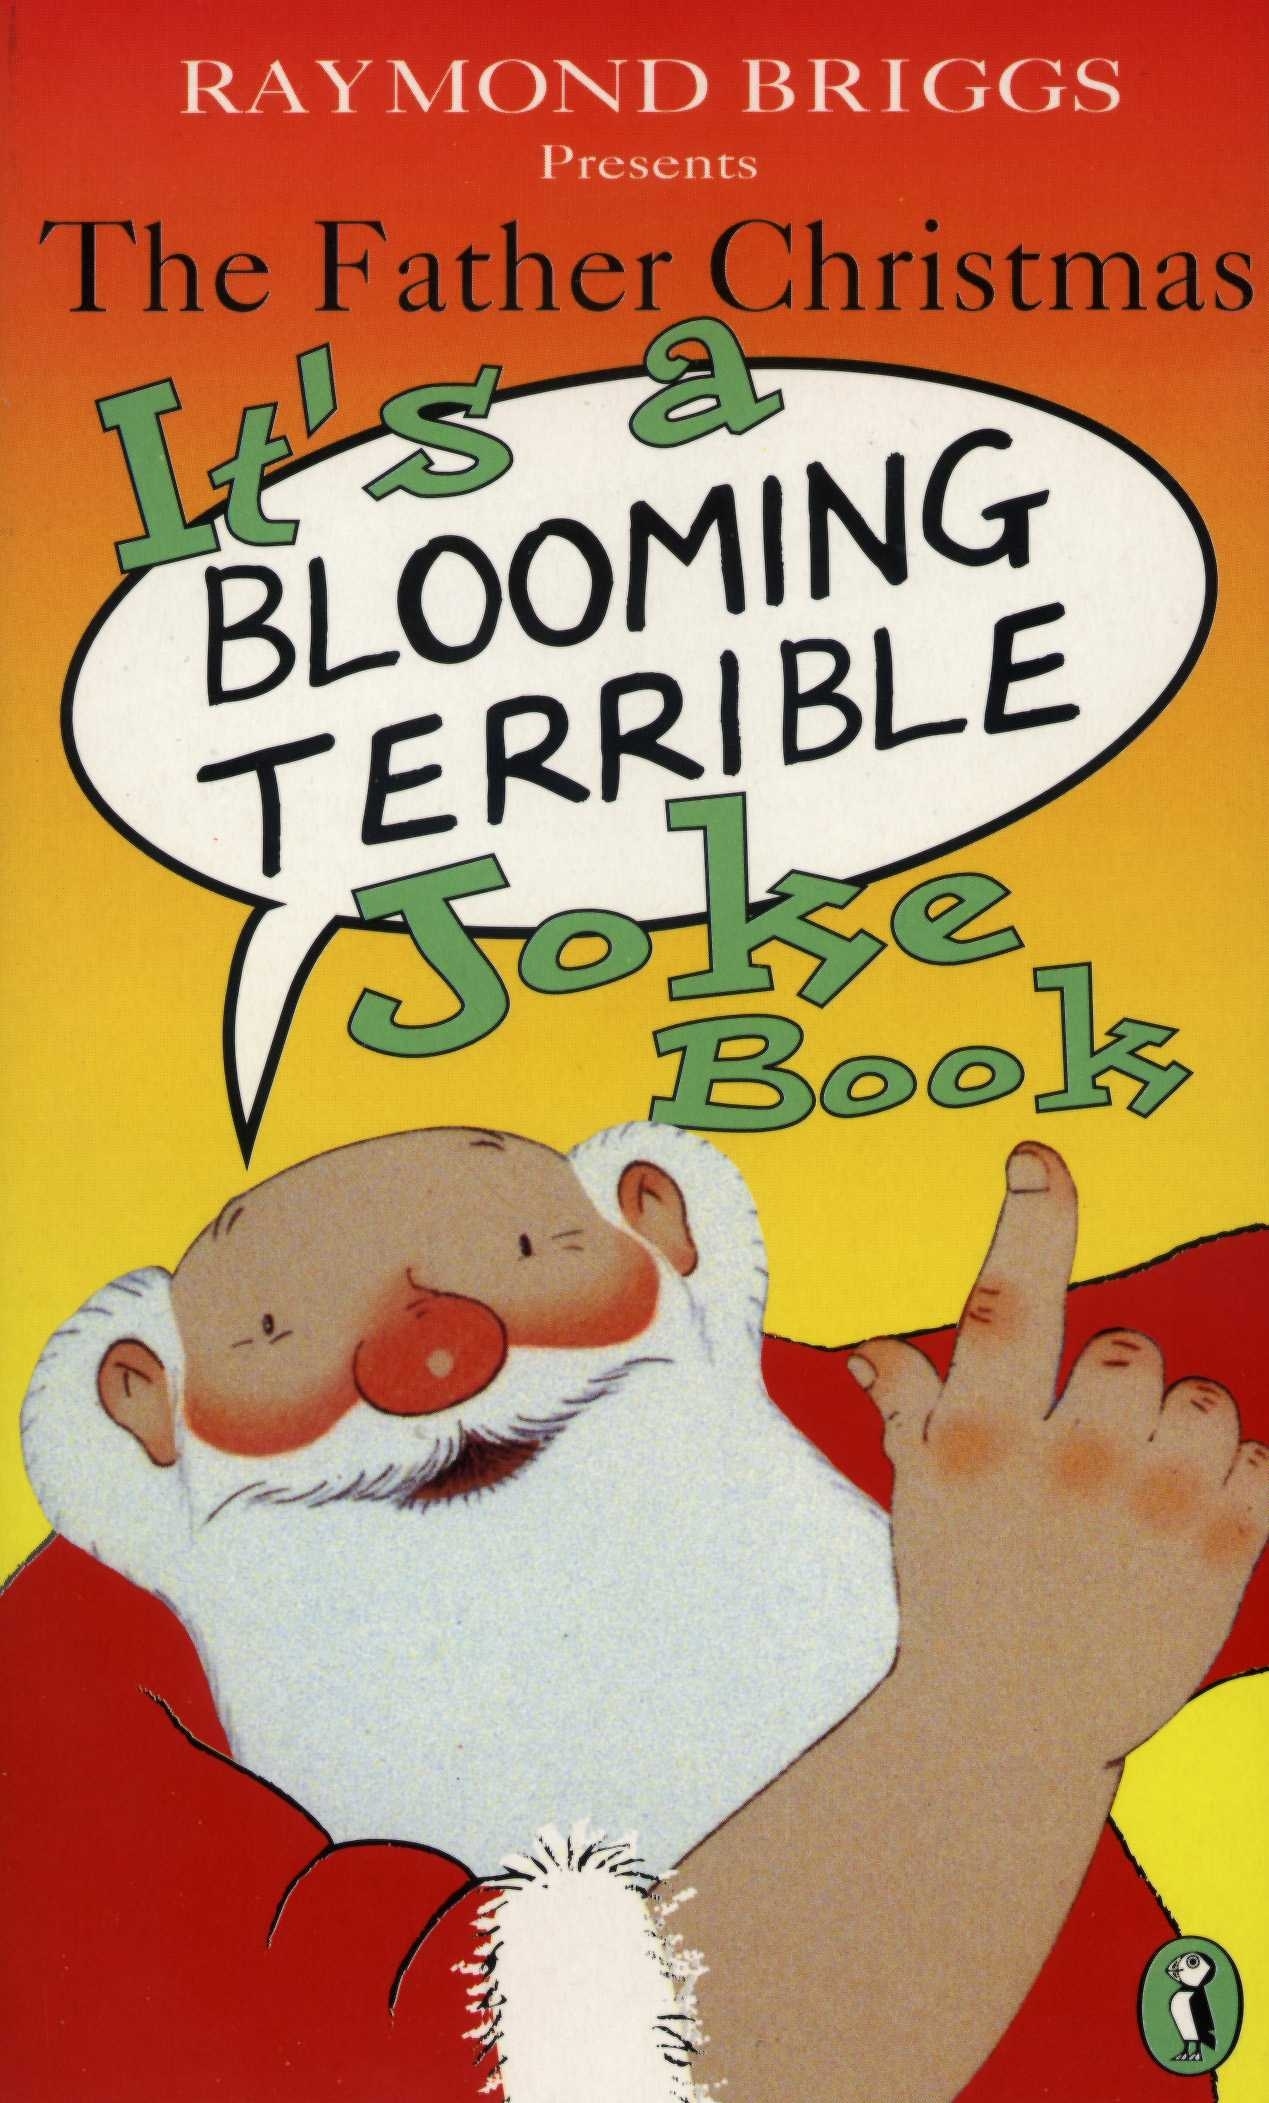 Book “The Father Christmas it's a Bloomin' Terrible Joke Book” by Raymond Briggs — October 30, 2008